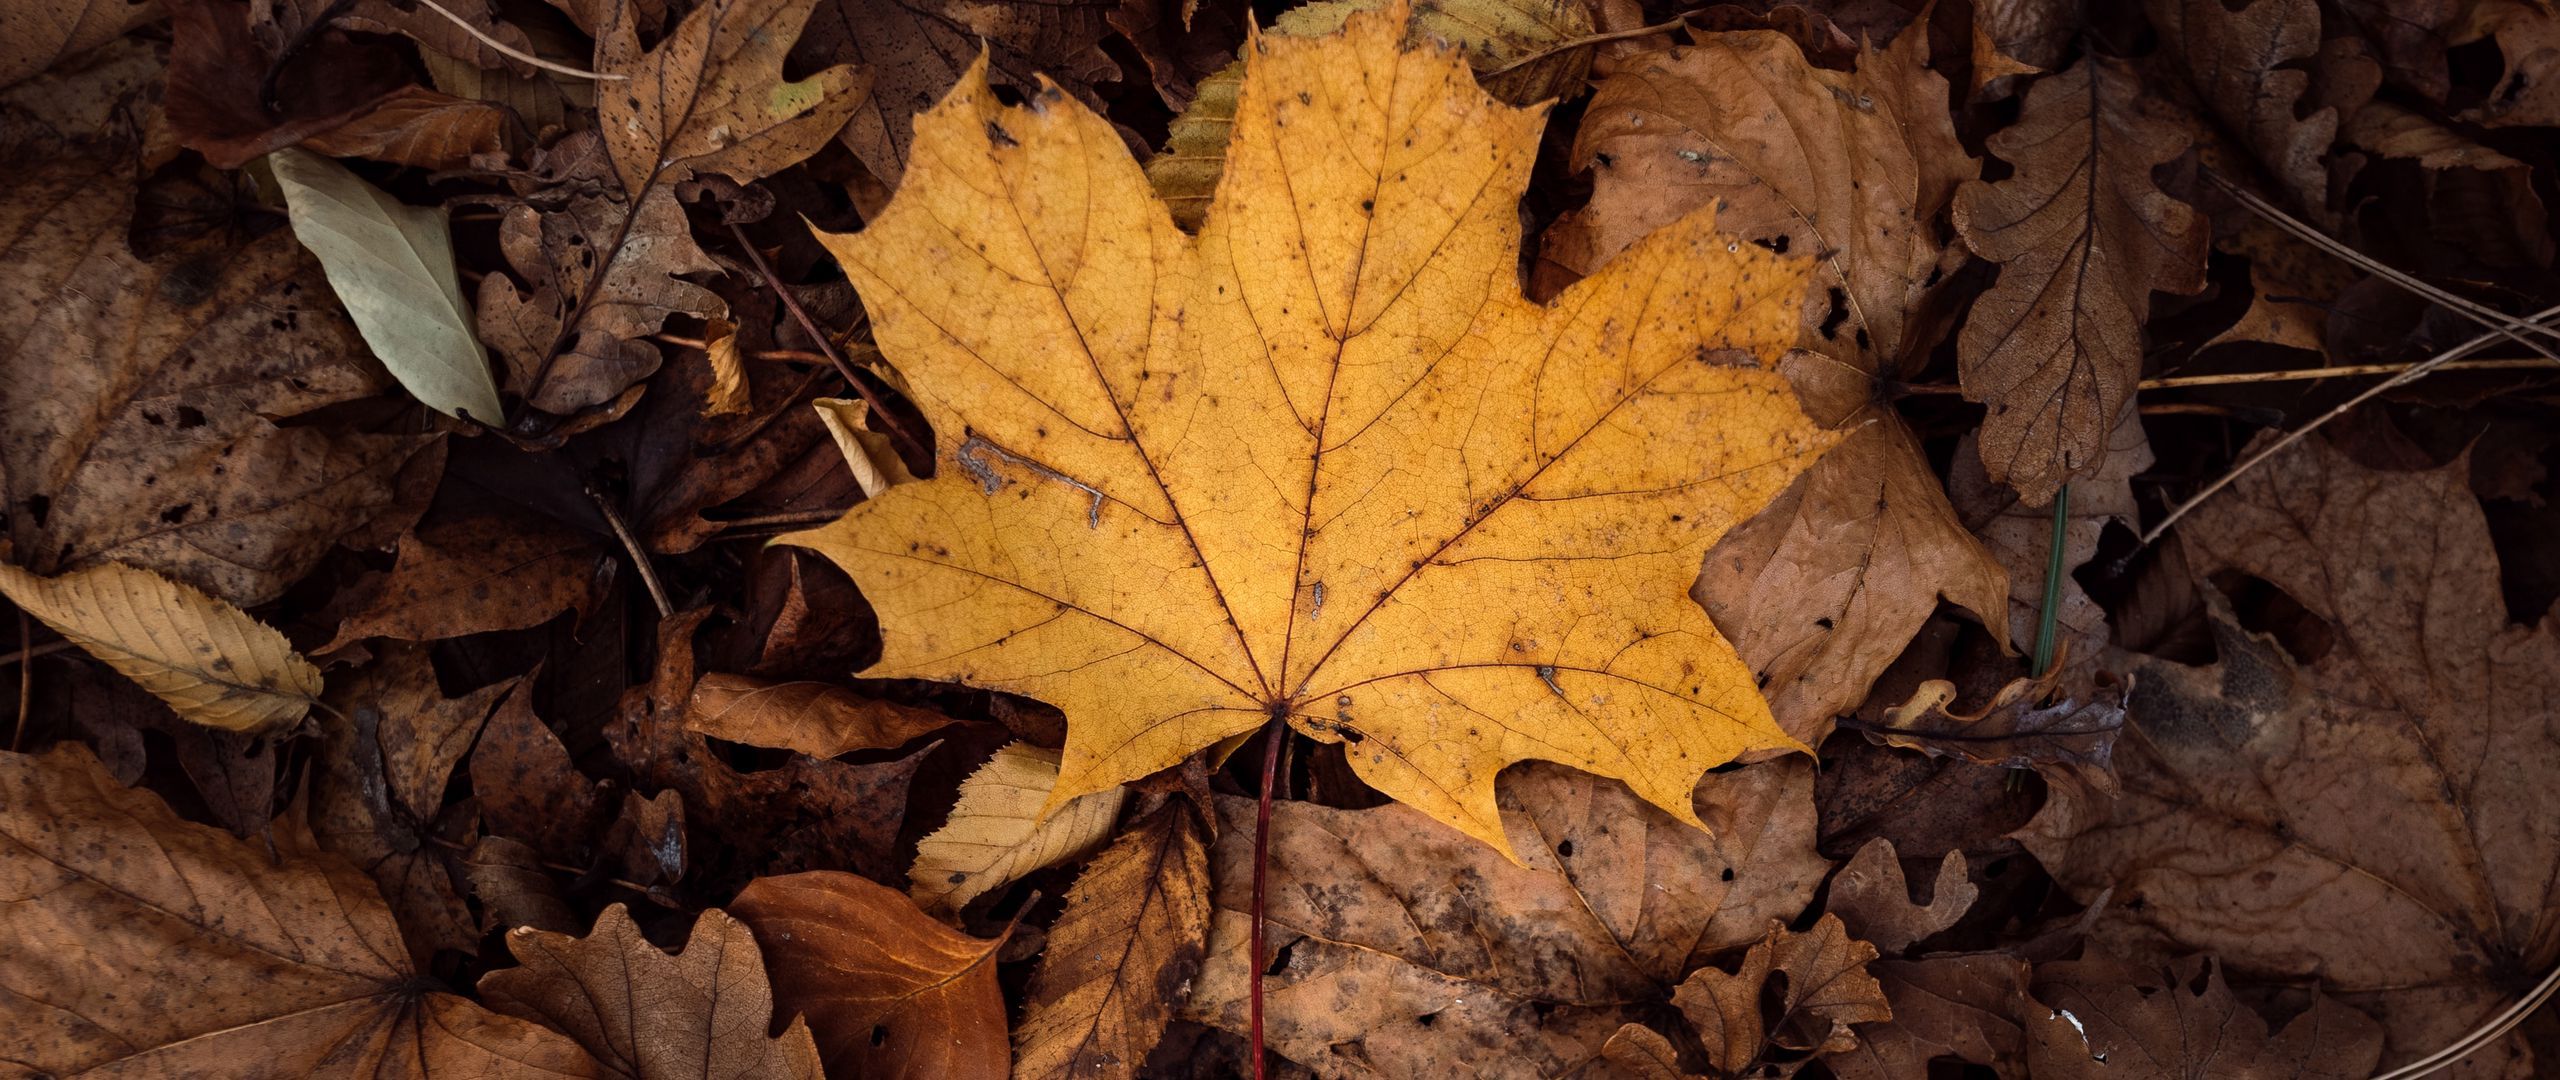 Download wallpaper 2560x1080 leaves, autumn, dry, foliage dual